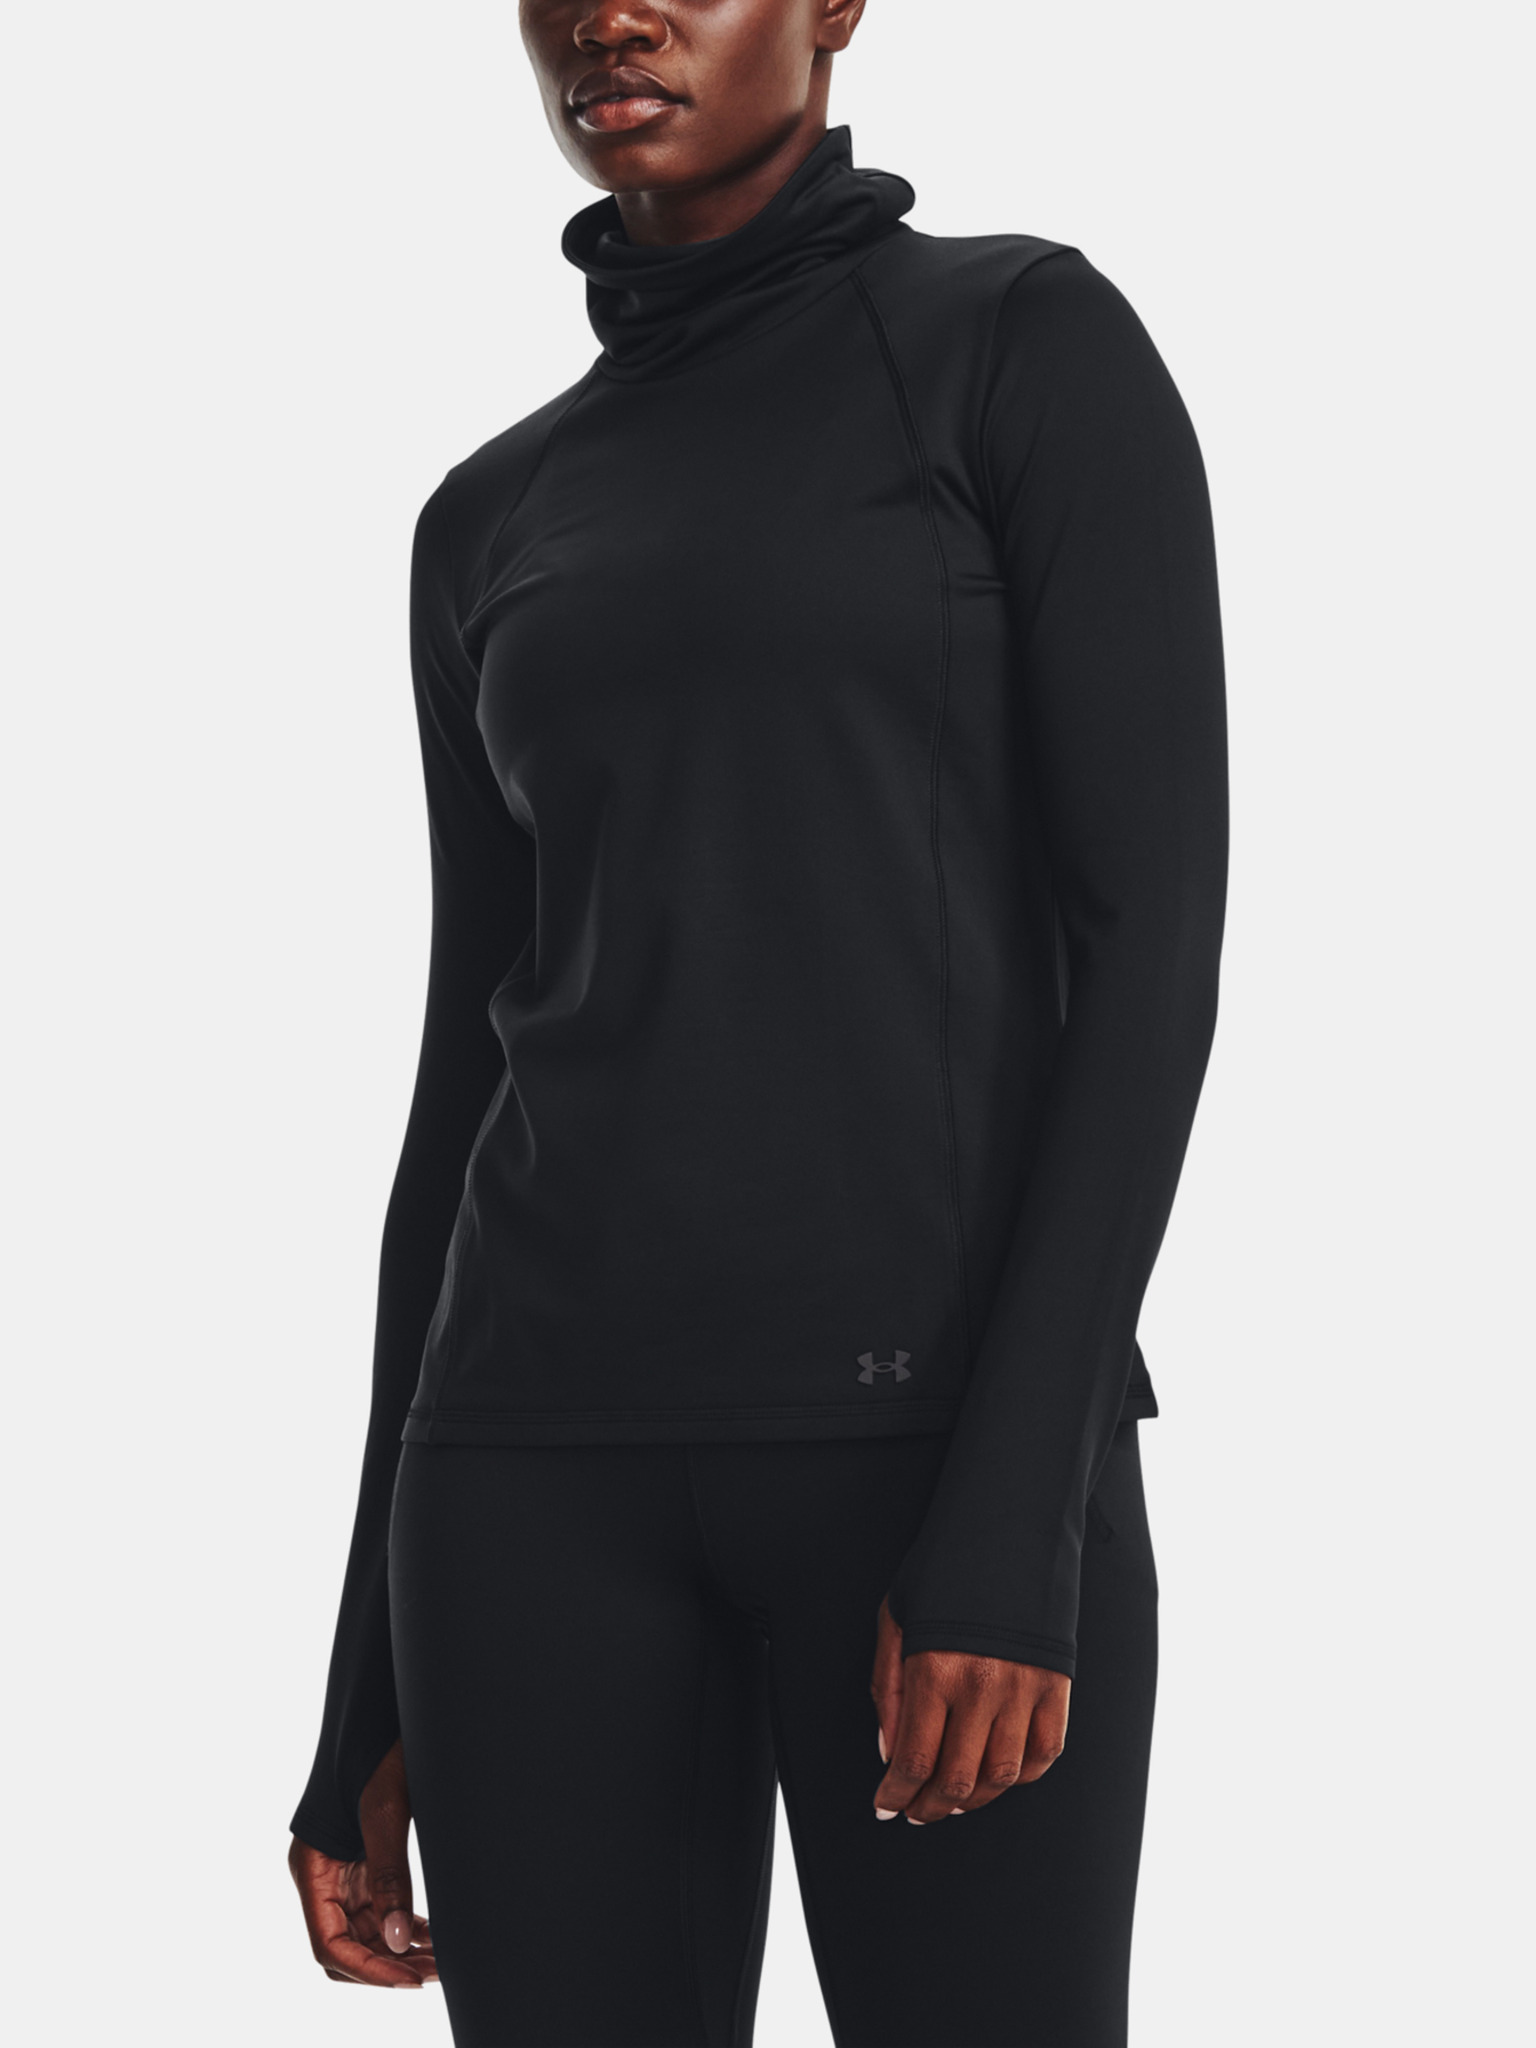 Under Armour - Womens Meridian Cw Funnel Neck Long-Sleeve T-Shirt